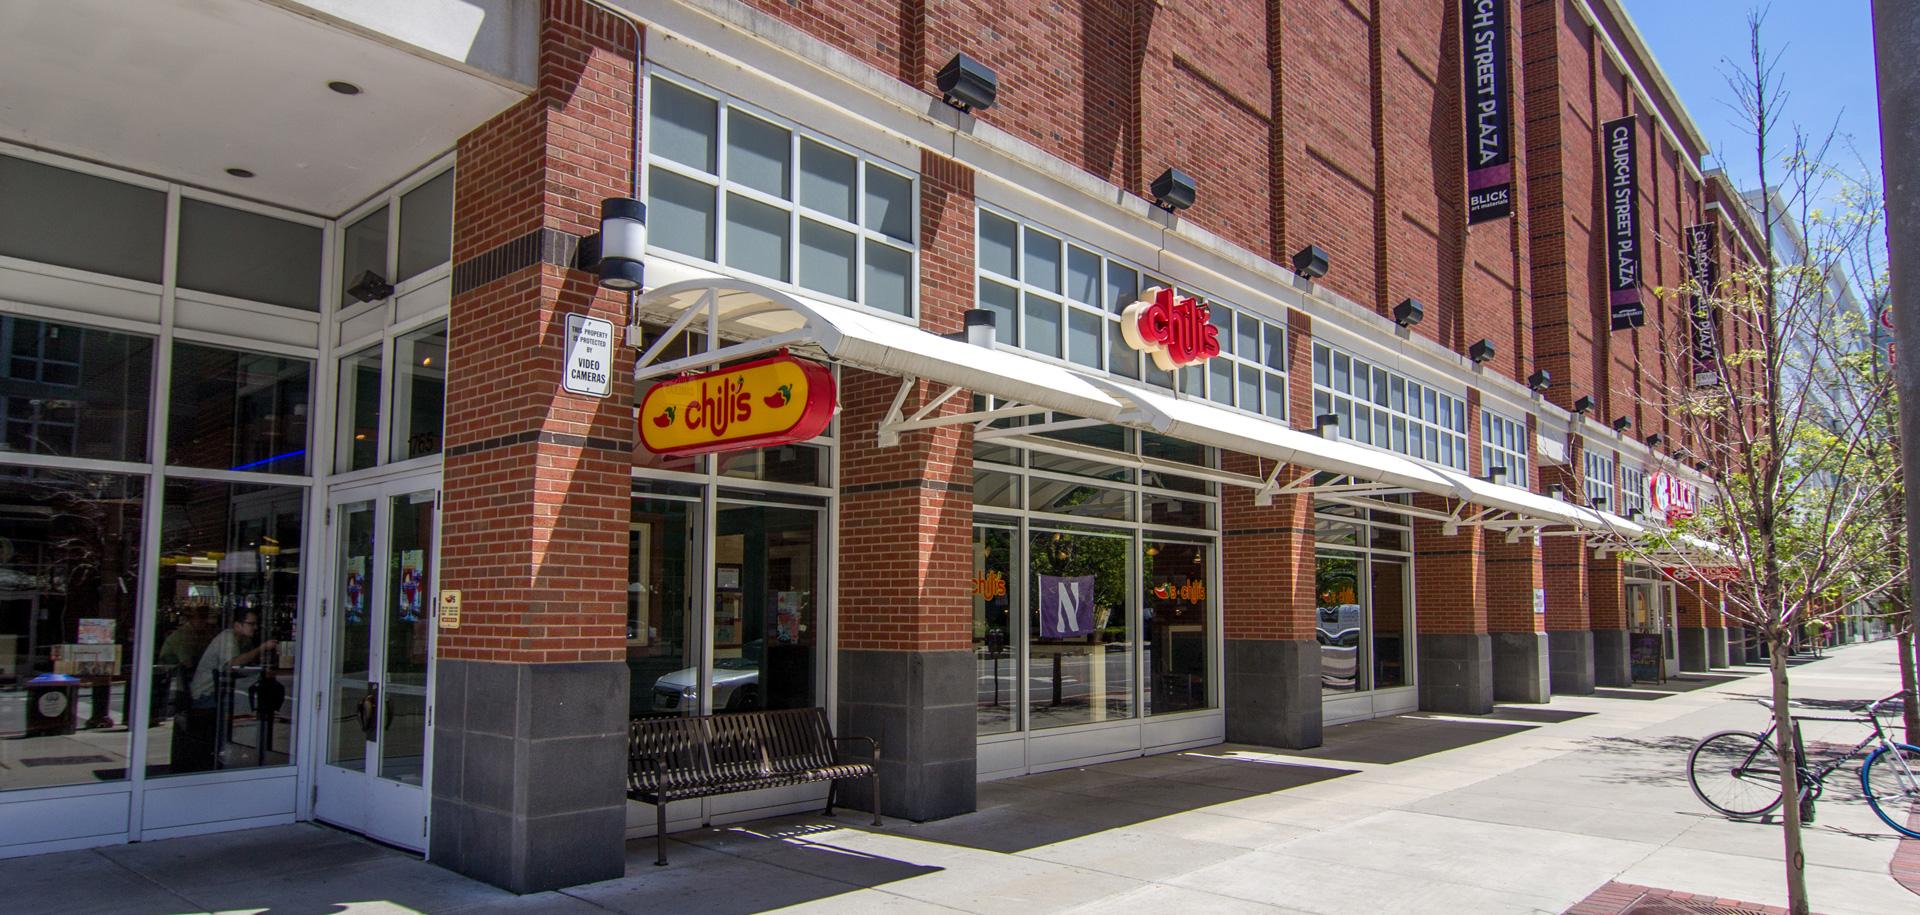 Image of the front of Chilis, Church Street Plaza, Evanston